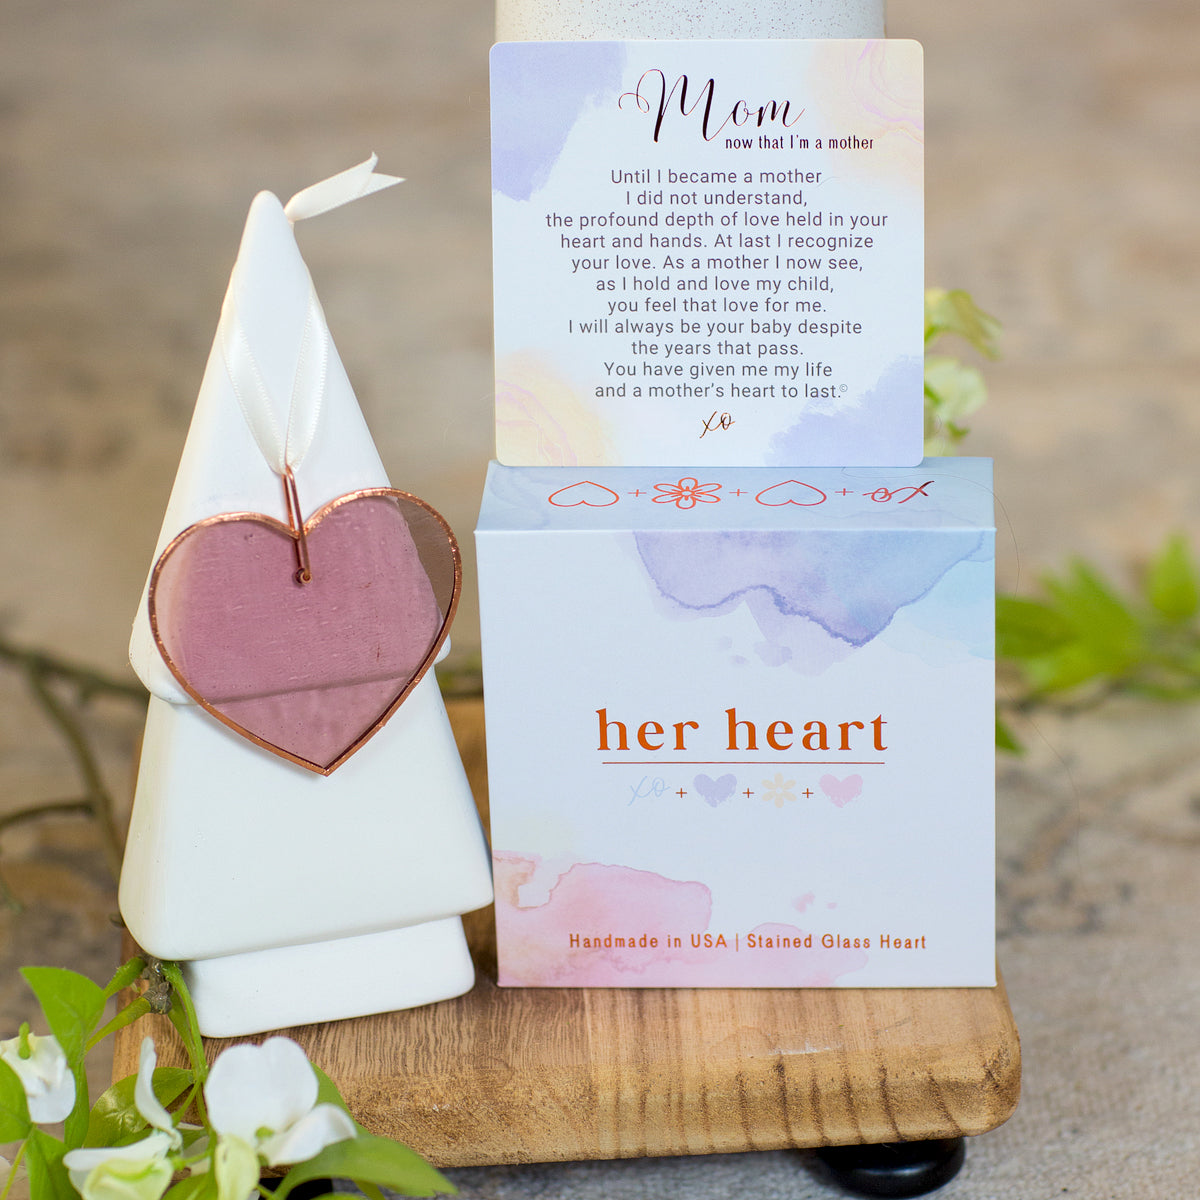 Her Heart for Mom, now that I&#39;m a mother gift with box, sentiment card, and pink stain glass heart.